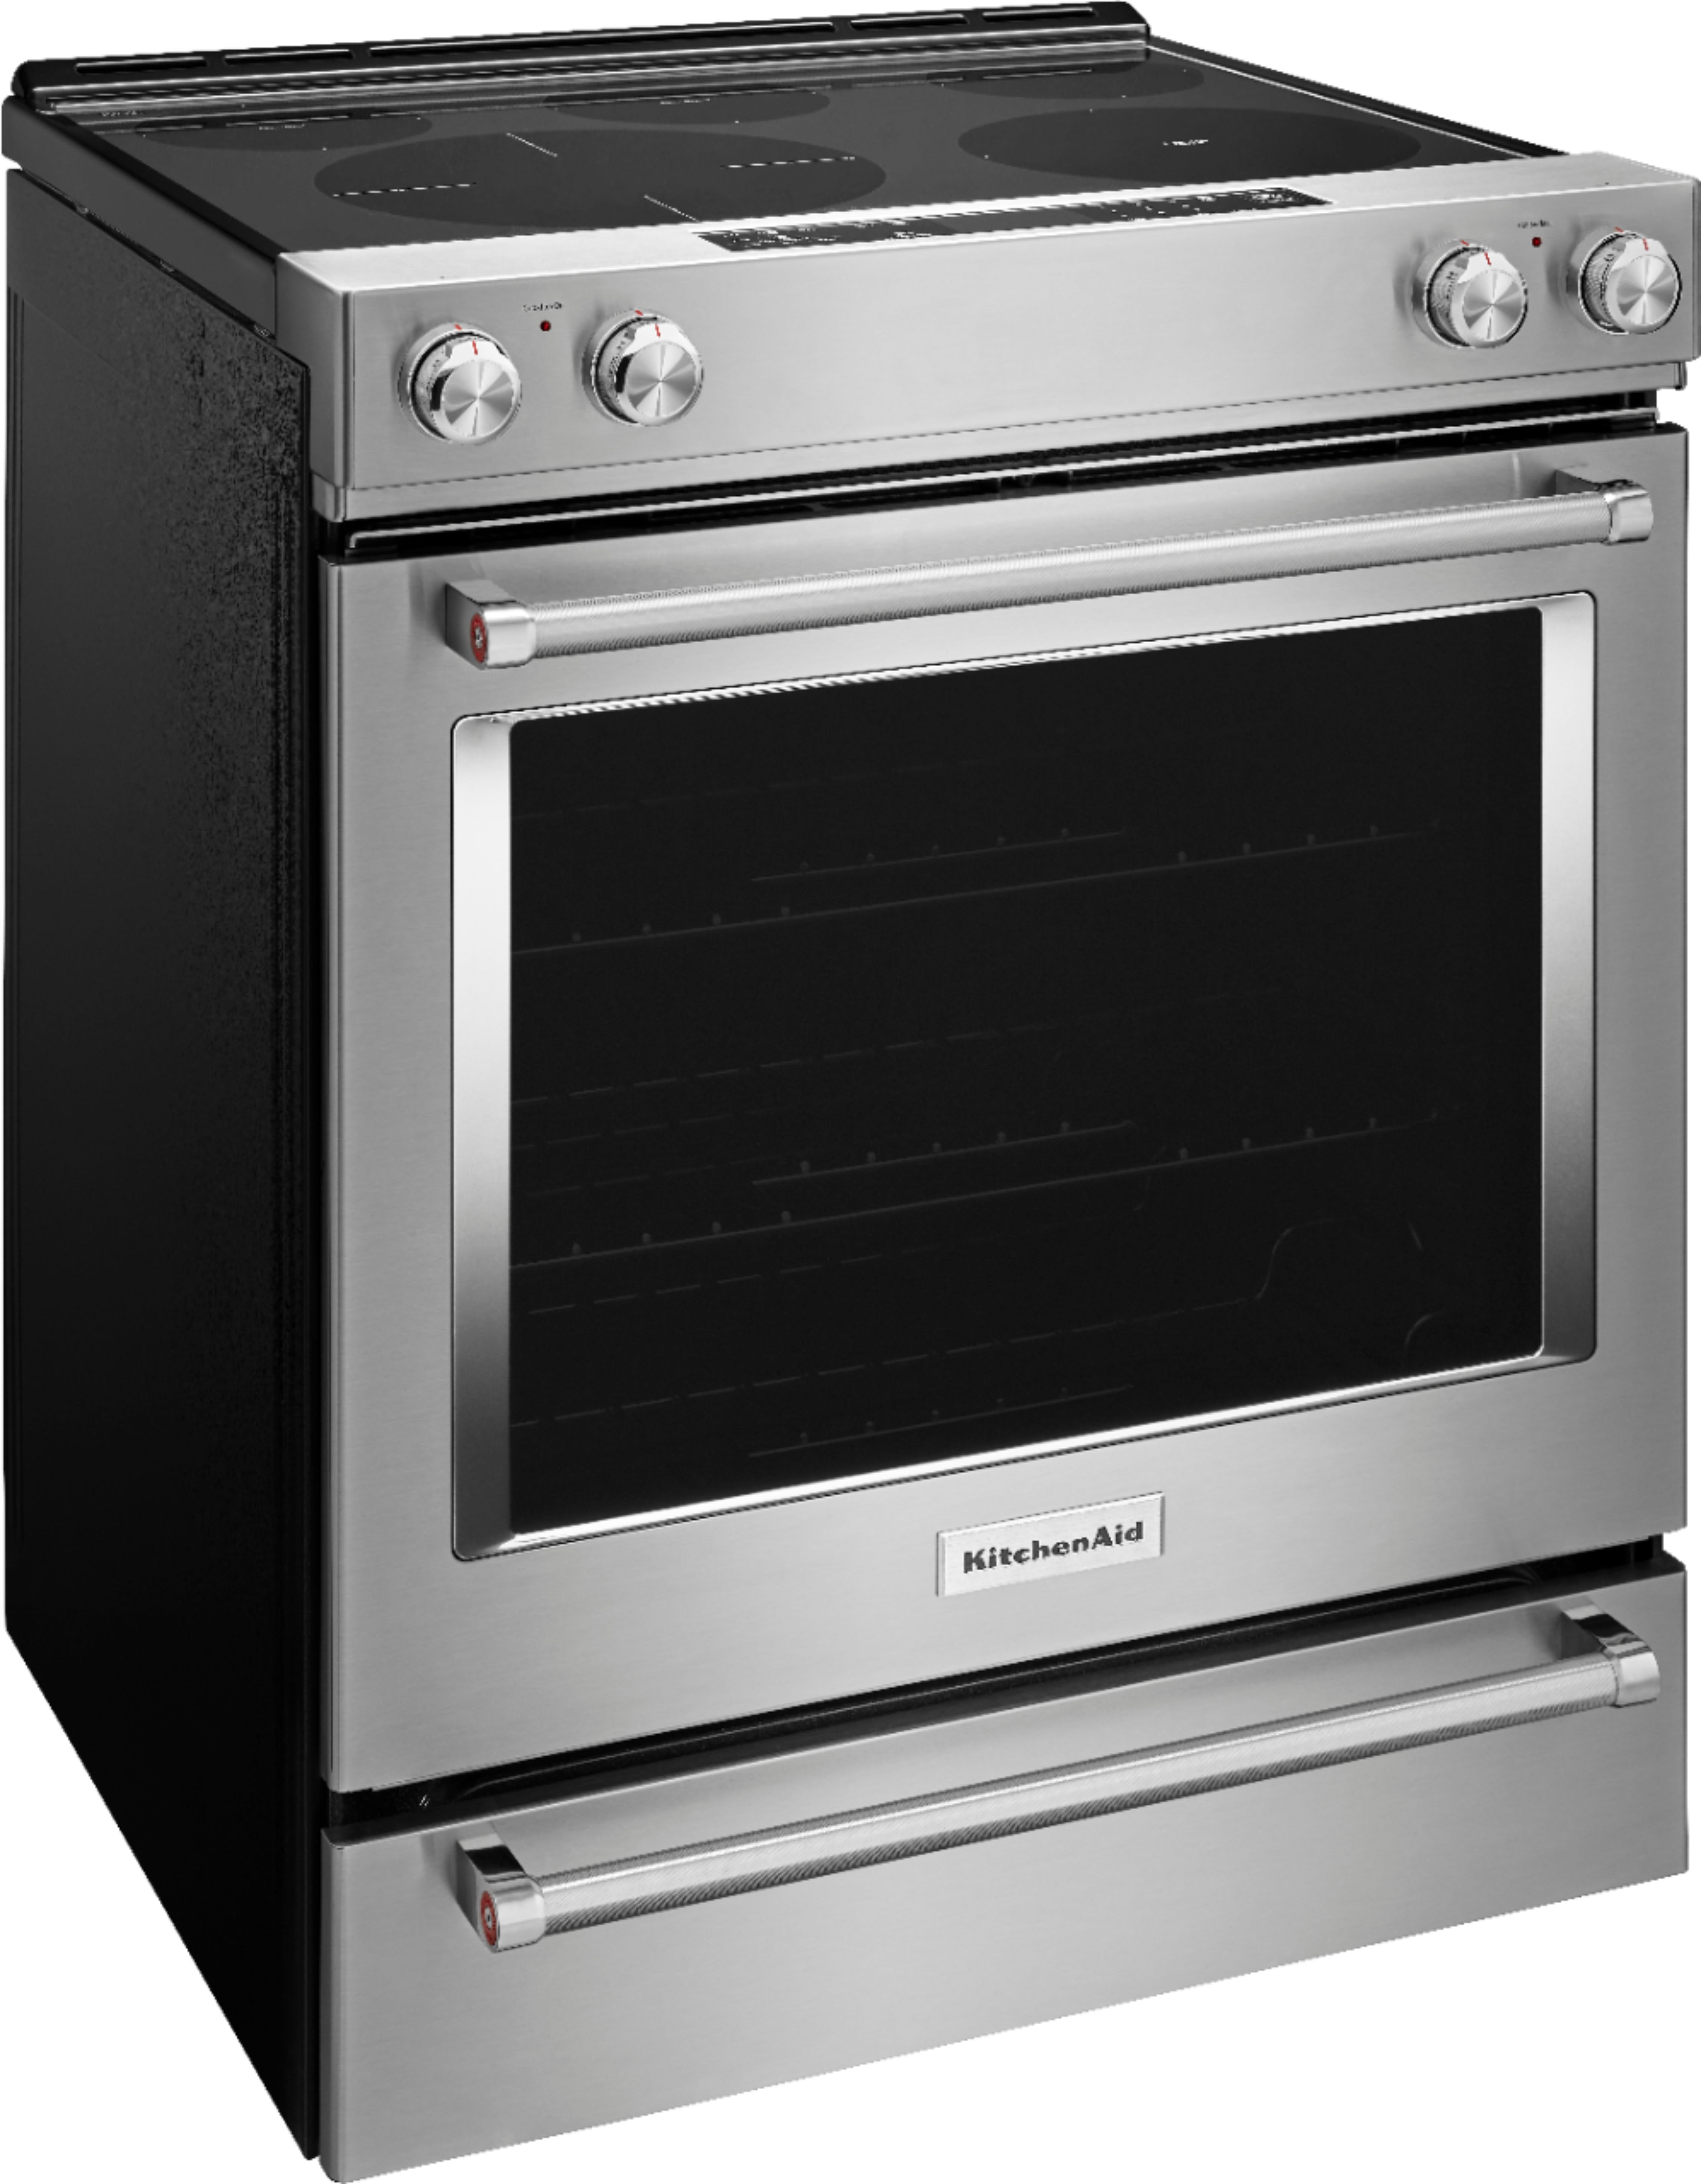 Angle View: KitchenAid - 7.1 Cu. Ft. Self-Cleaning Slide-In Electric Induction Convection Range - Stainless steel